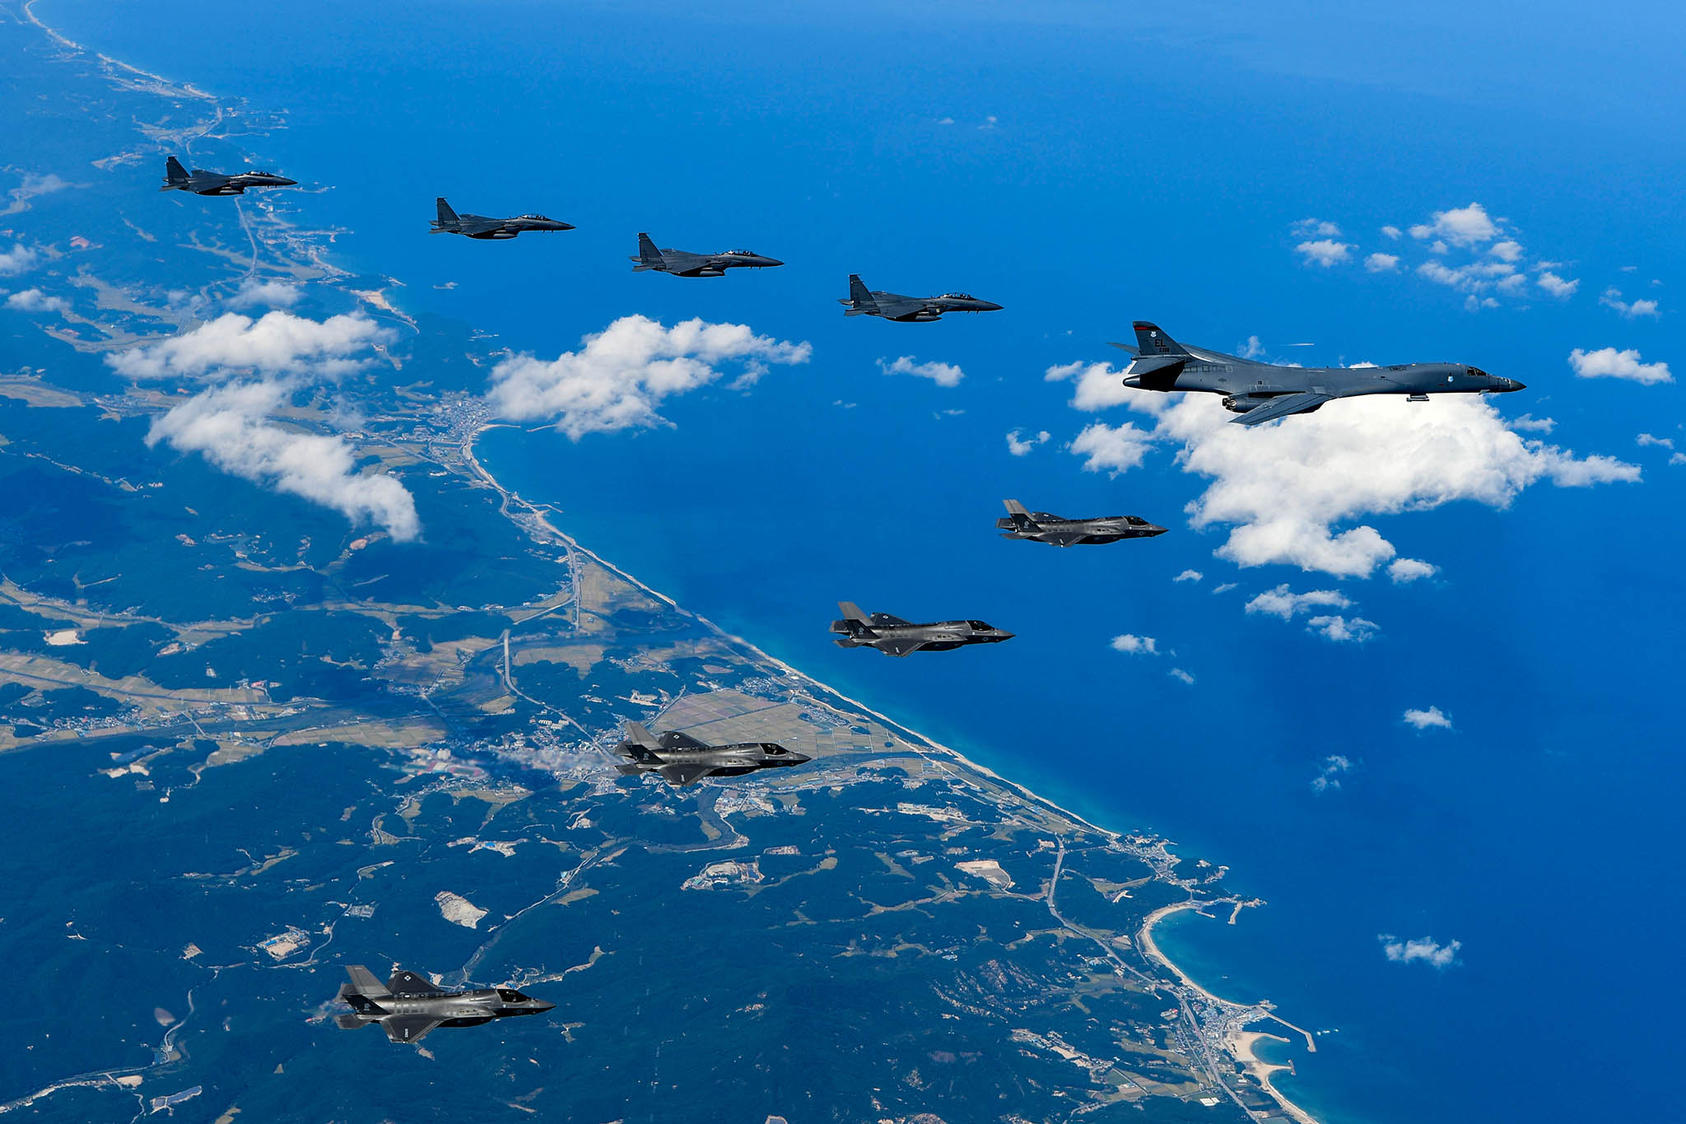  Air Force and Marine Corps aircraft conduct a mission with the South Korean air force over the Korean Peninsula. (Staff Sgt. Steven Schneider/U.S. Army)